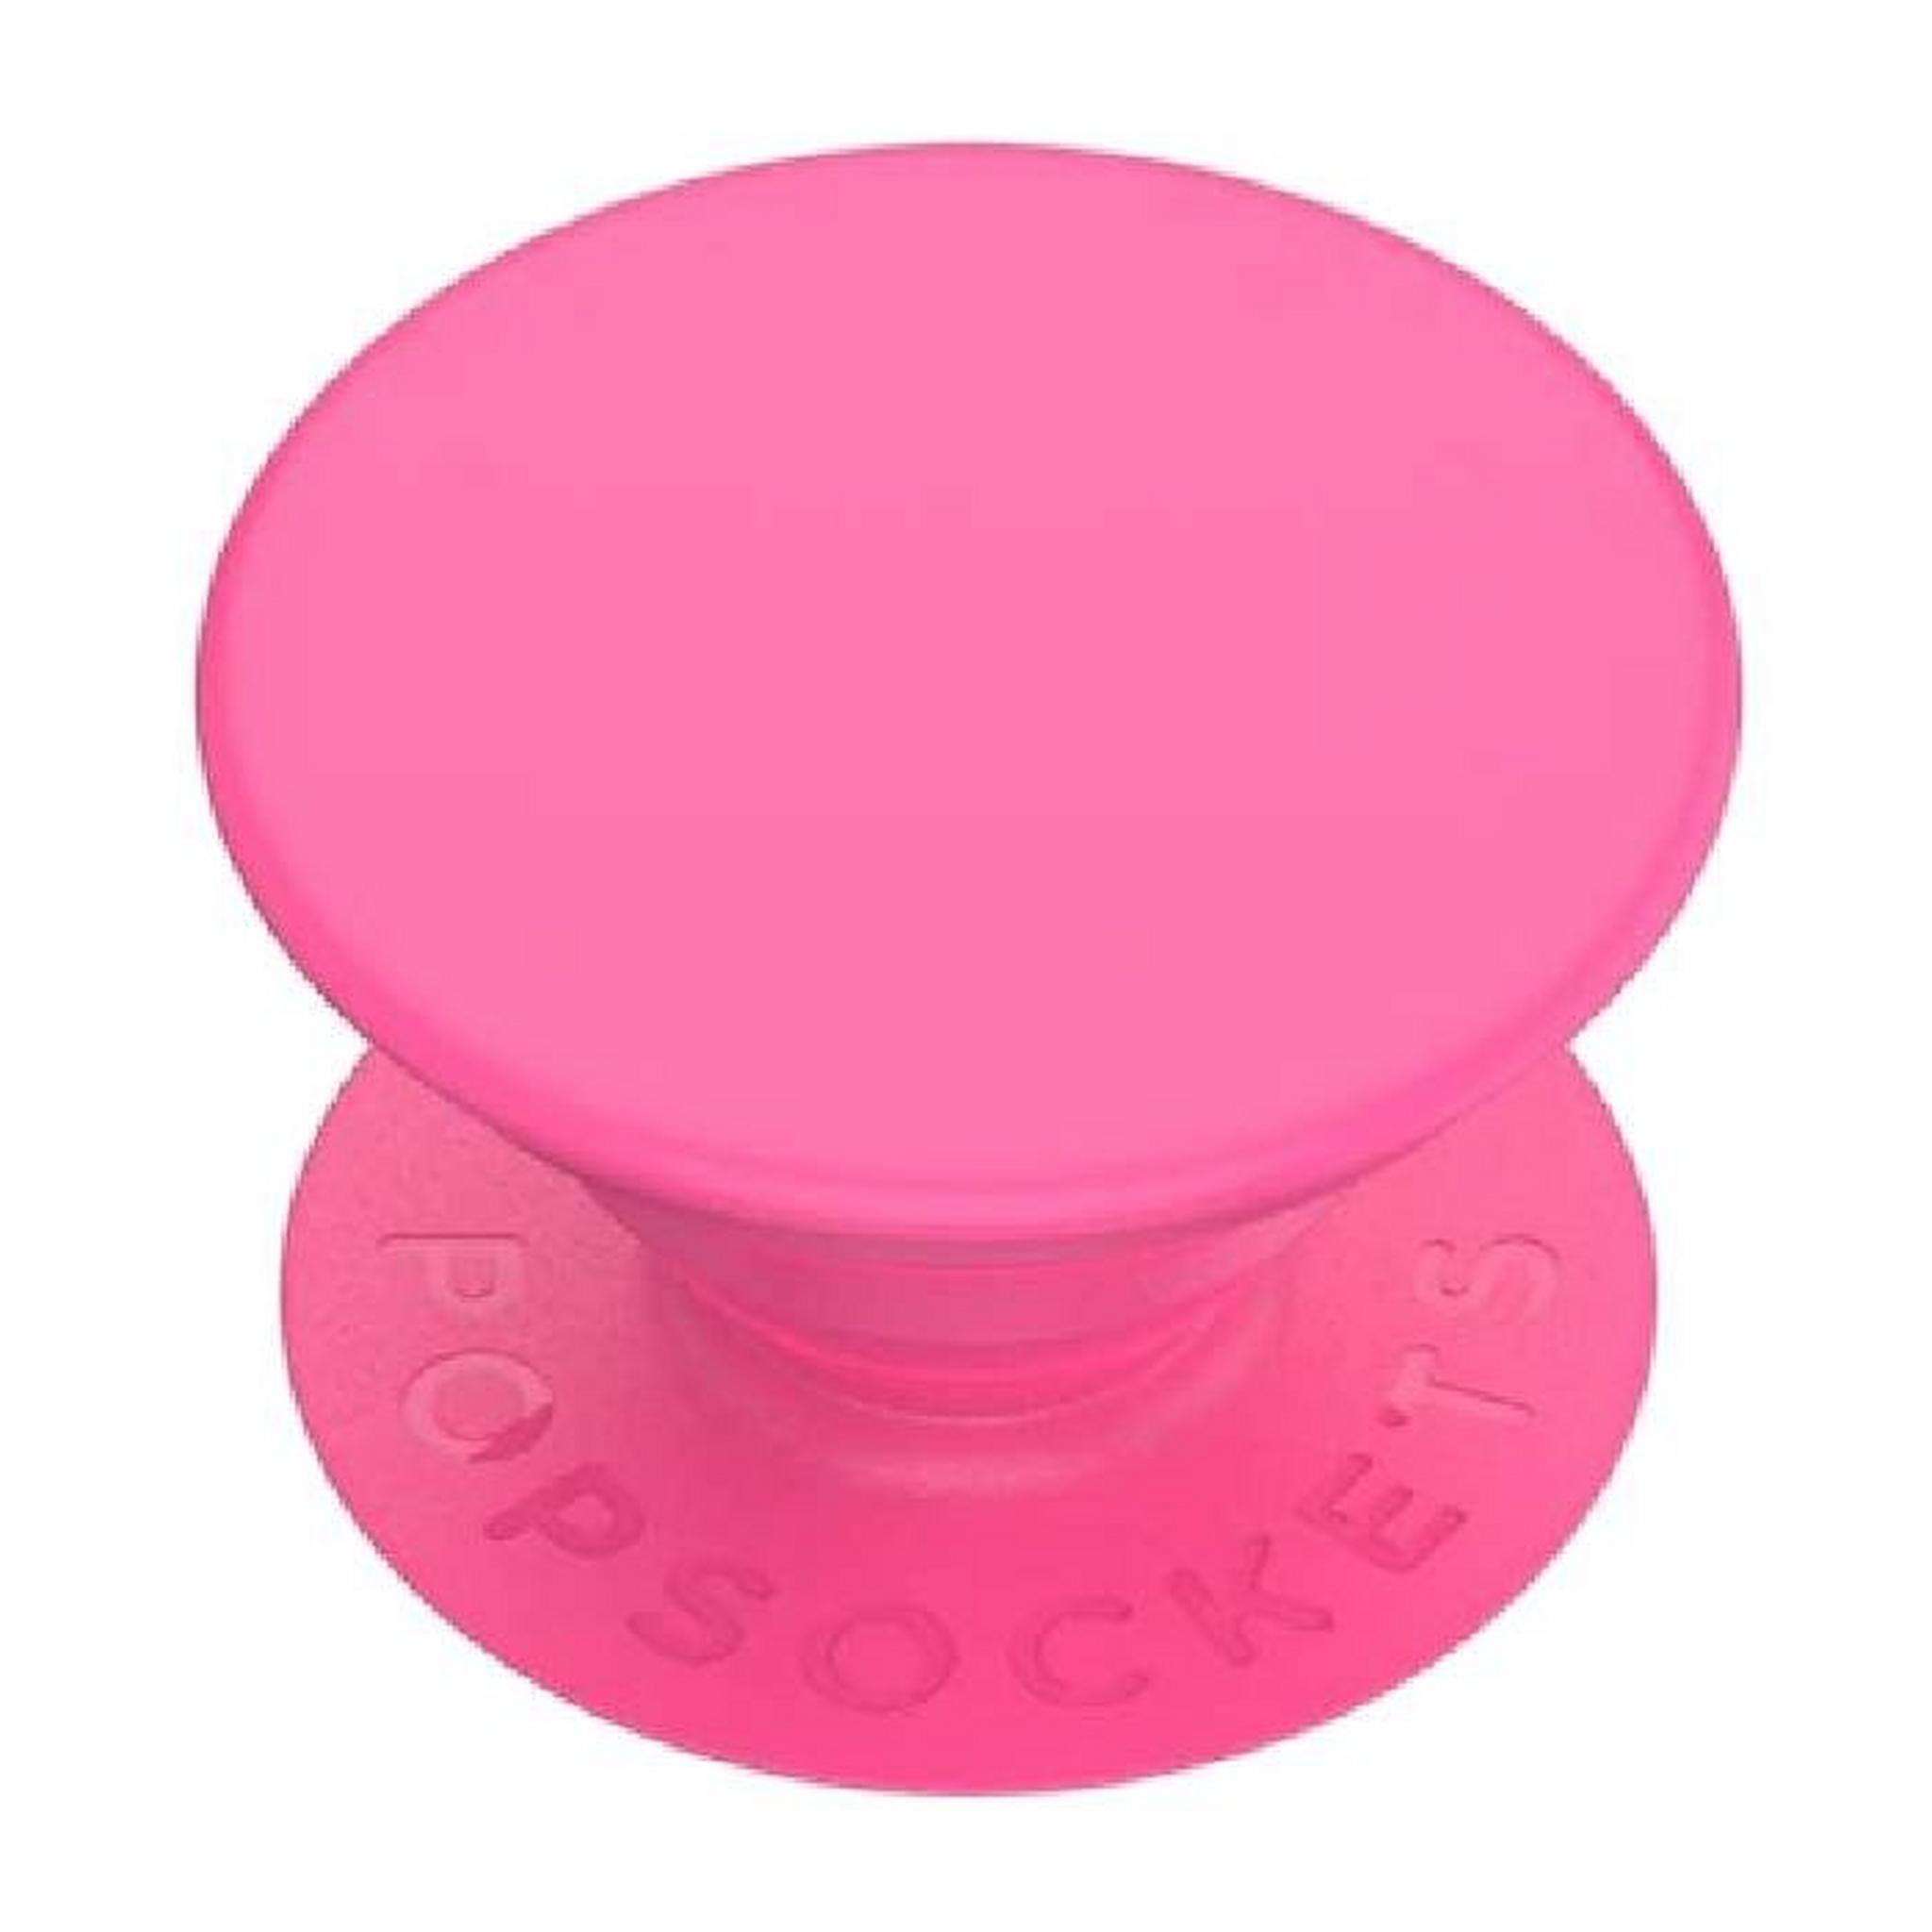 PopSockets Phone Stand and Grip (802460) – Neon Day Glo Pink